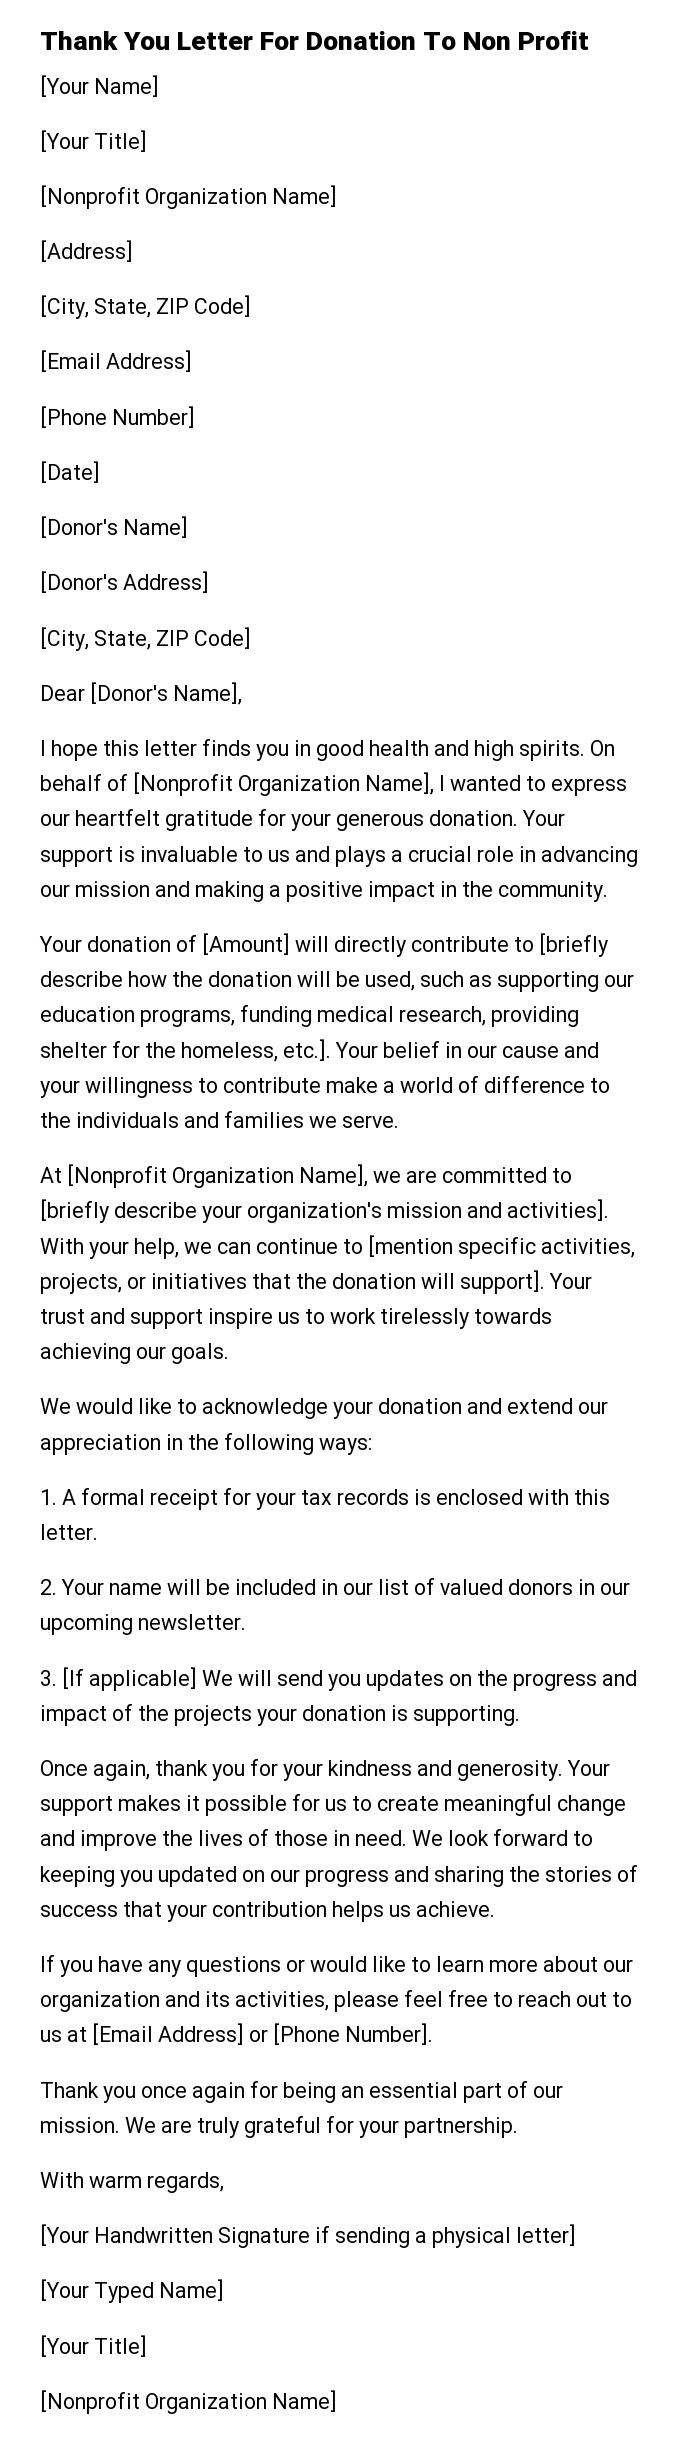 Thank You Letter For Donation To Non Profit